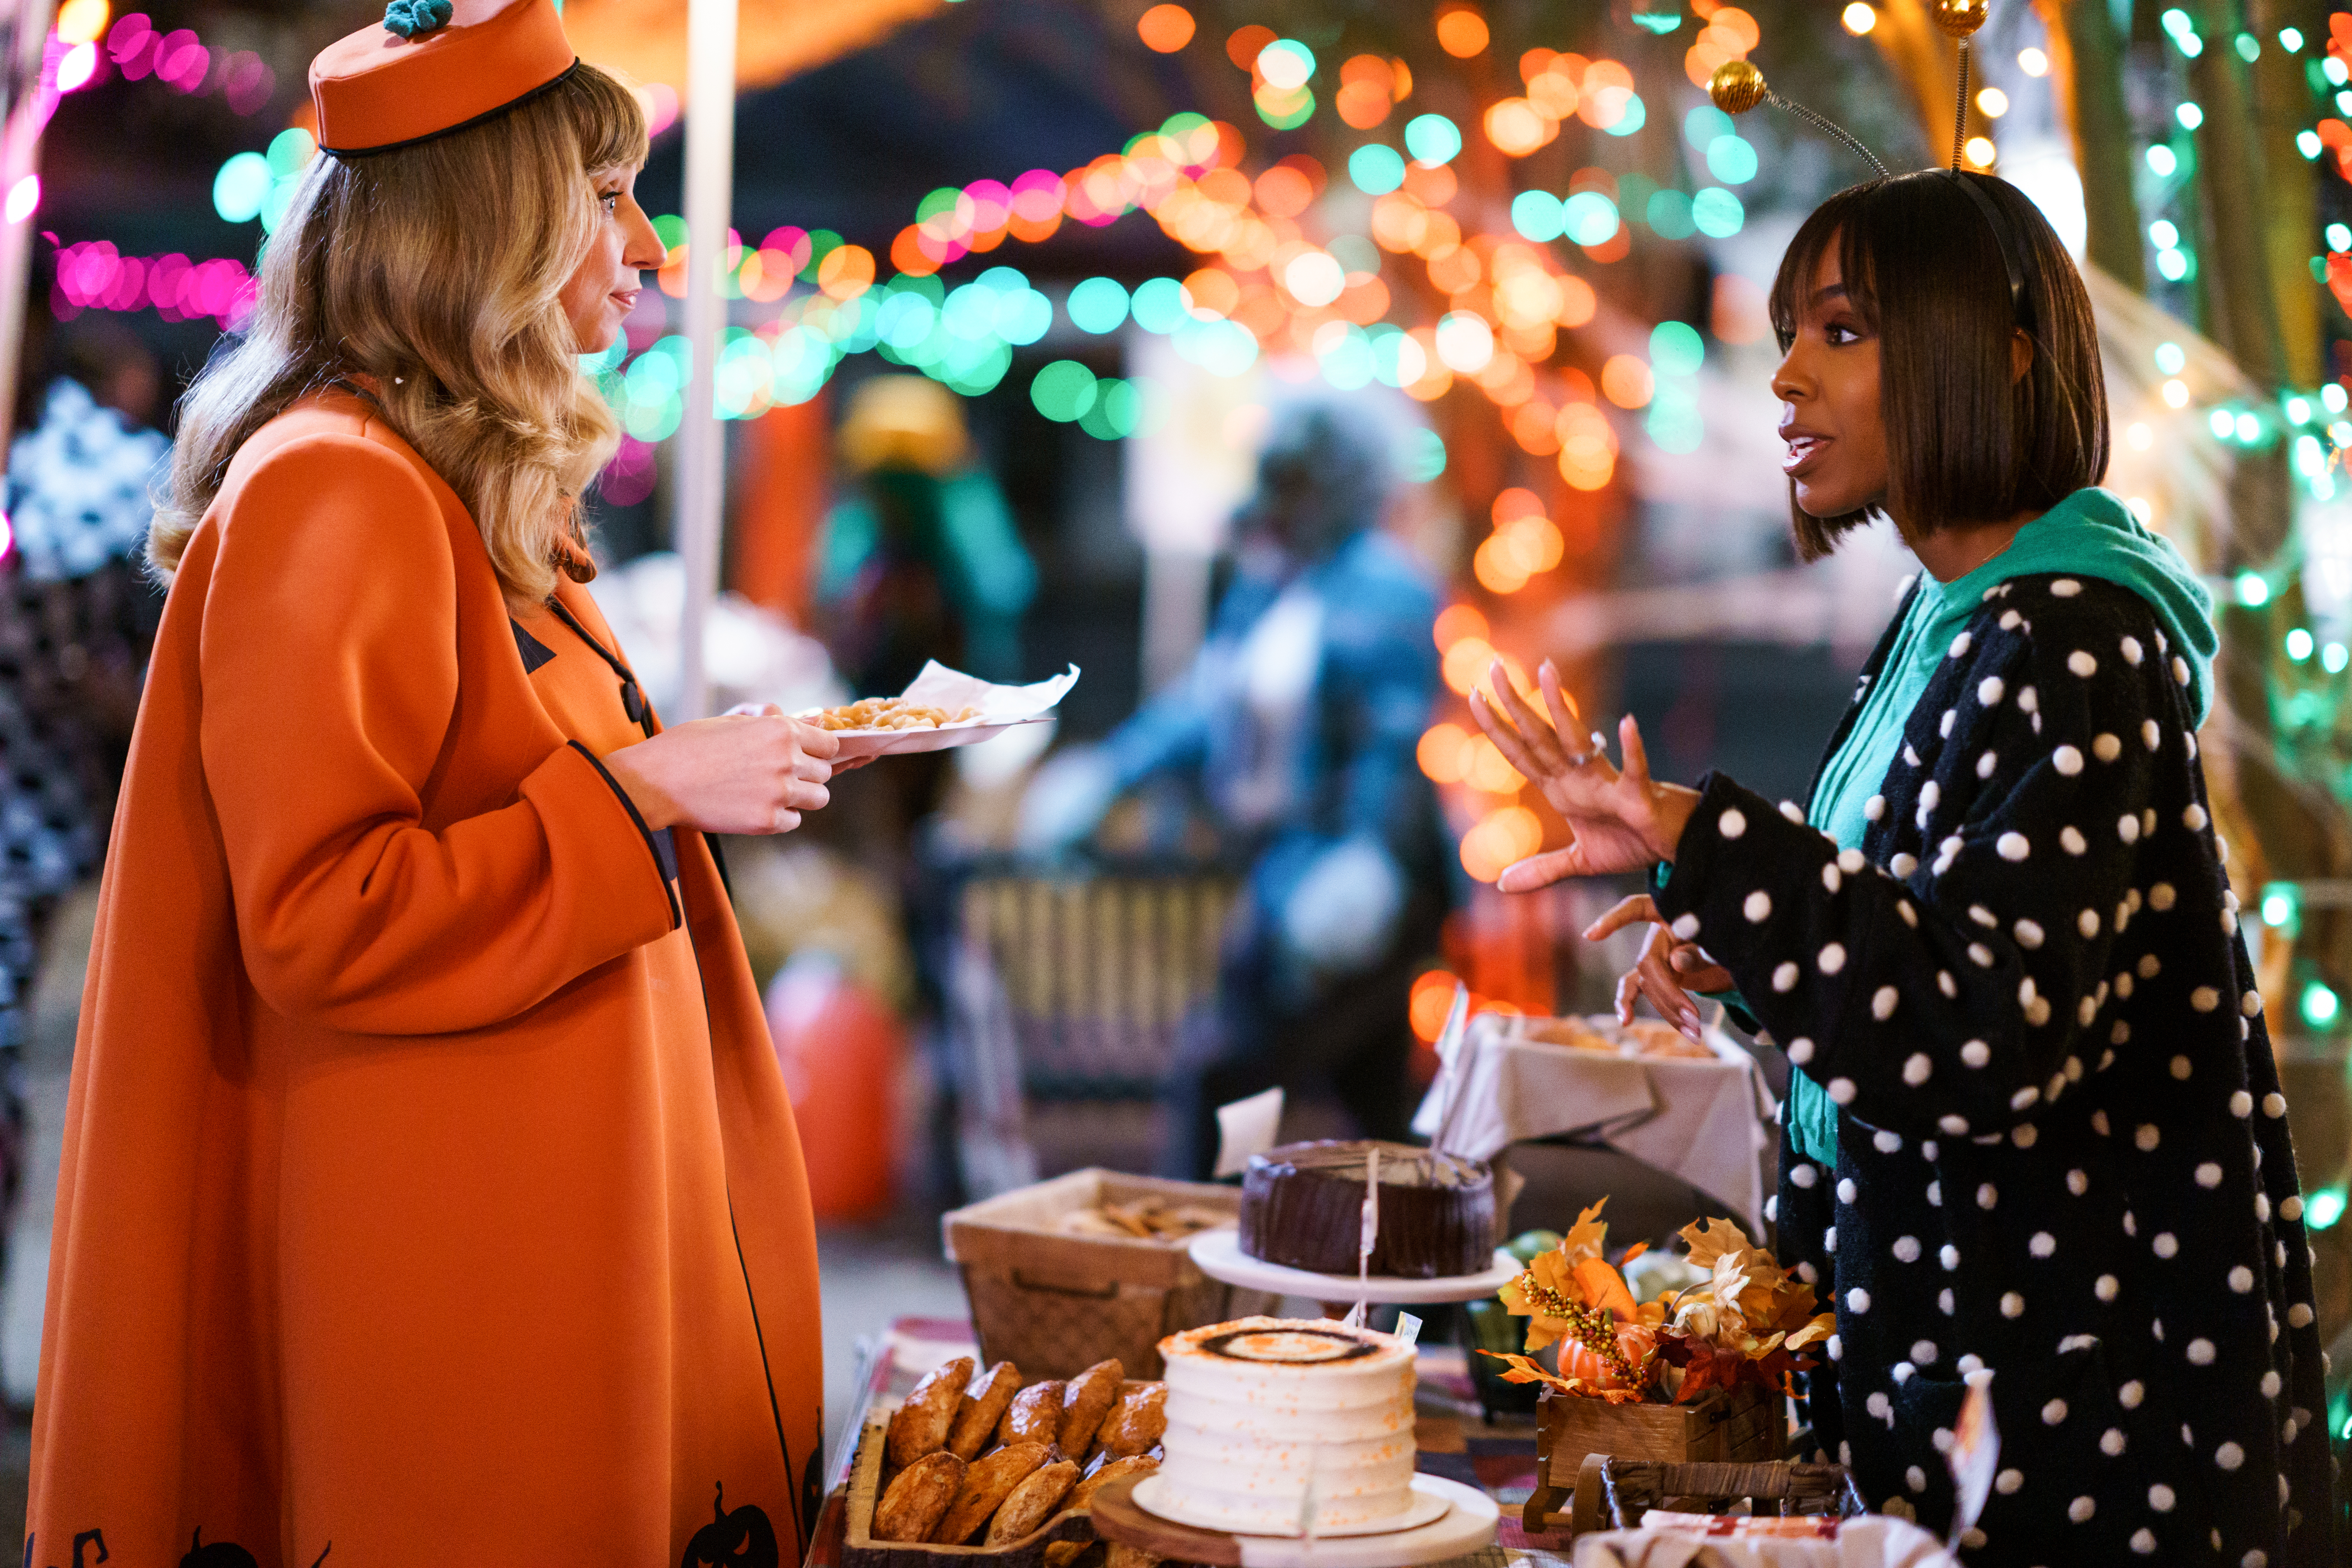 The Curse of Bridge Hollow. (L to R) Lauren Lapkus as Mayor Tammy, Kelly Rowland as Emily in The Curse of Bridge Hollow. Cr. Frank Masi/Netflix Â© 2022.